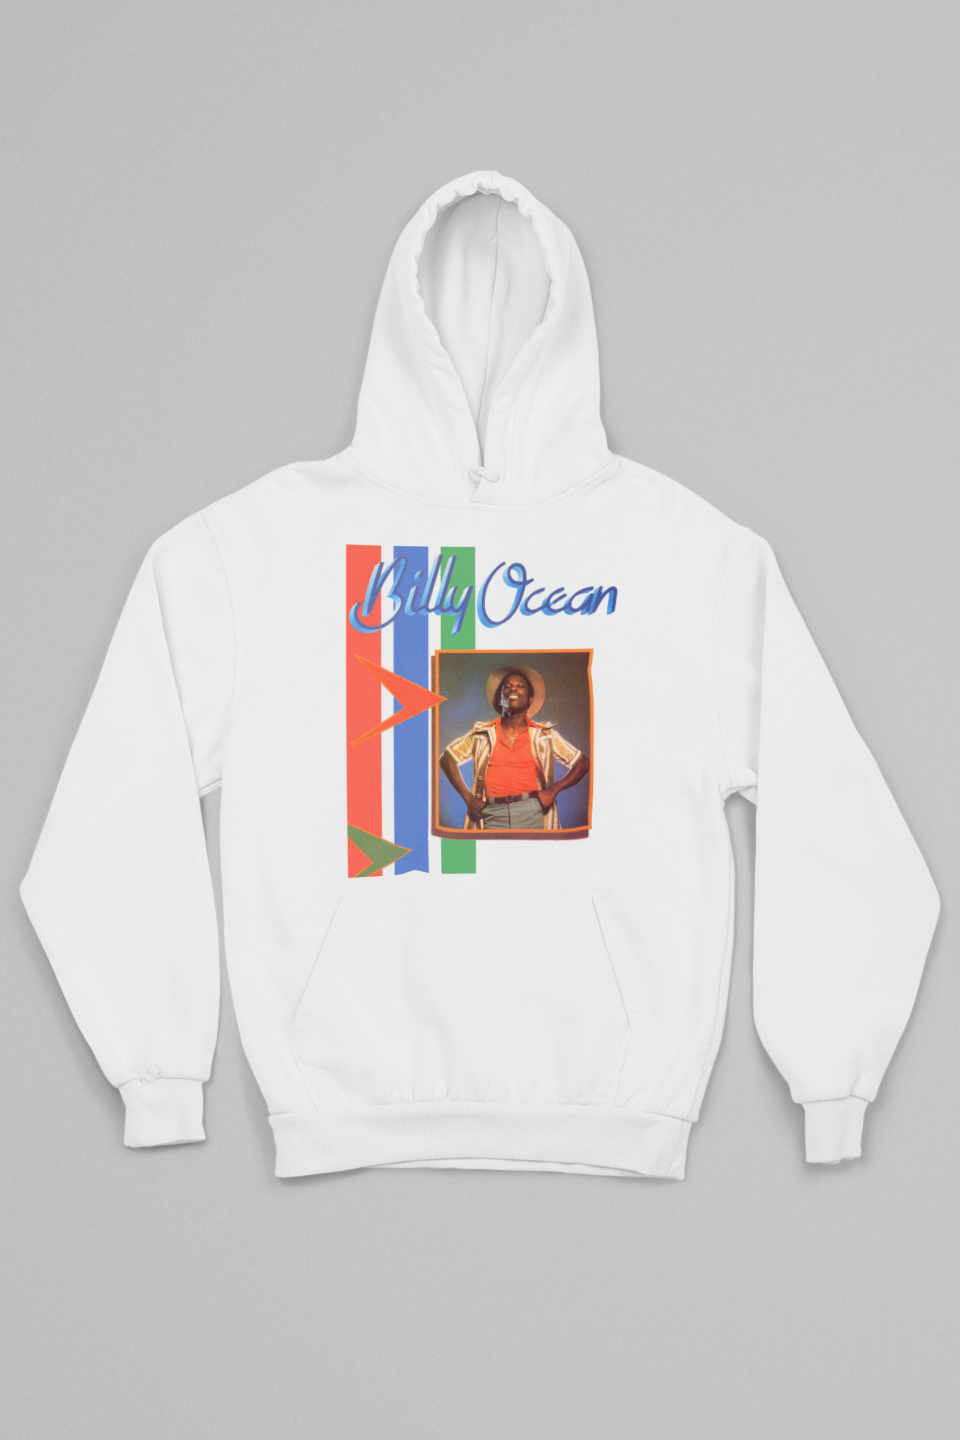 BILLY OCEAN' - EXPLODED HOODIE FRONT PRINT ONLY